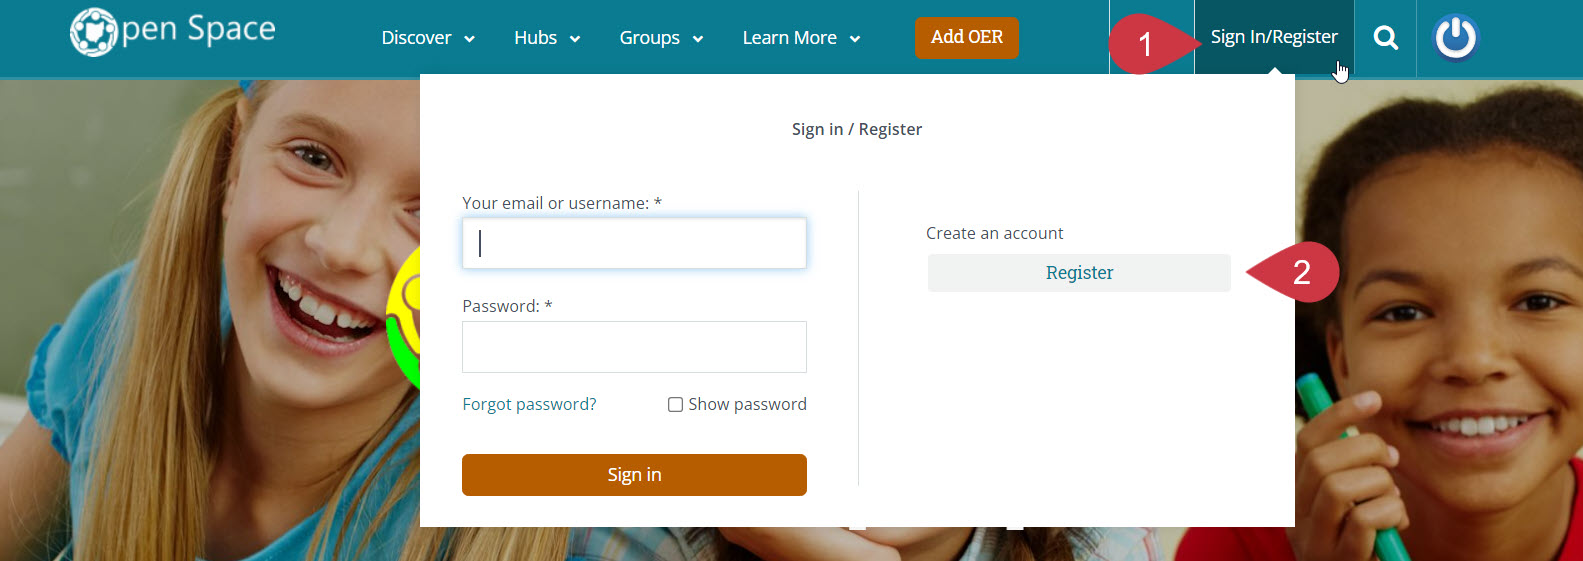 screenshot of the first step of the Open Space account registration